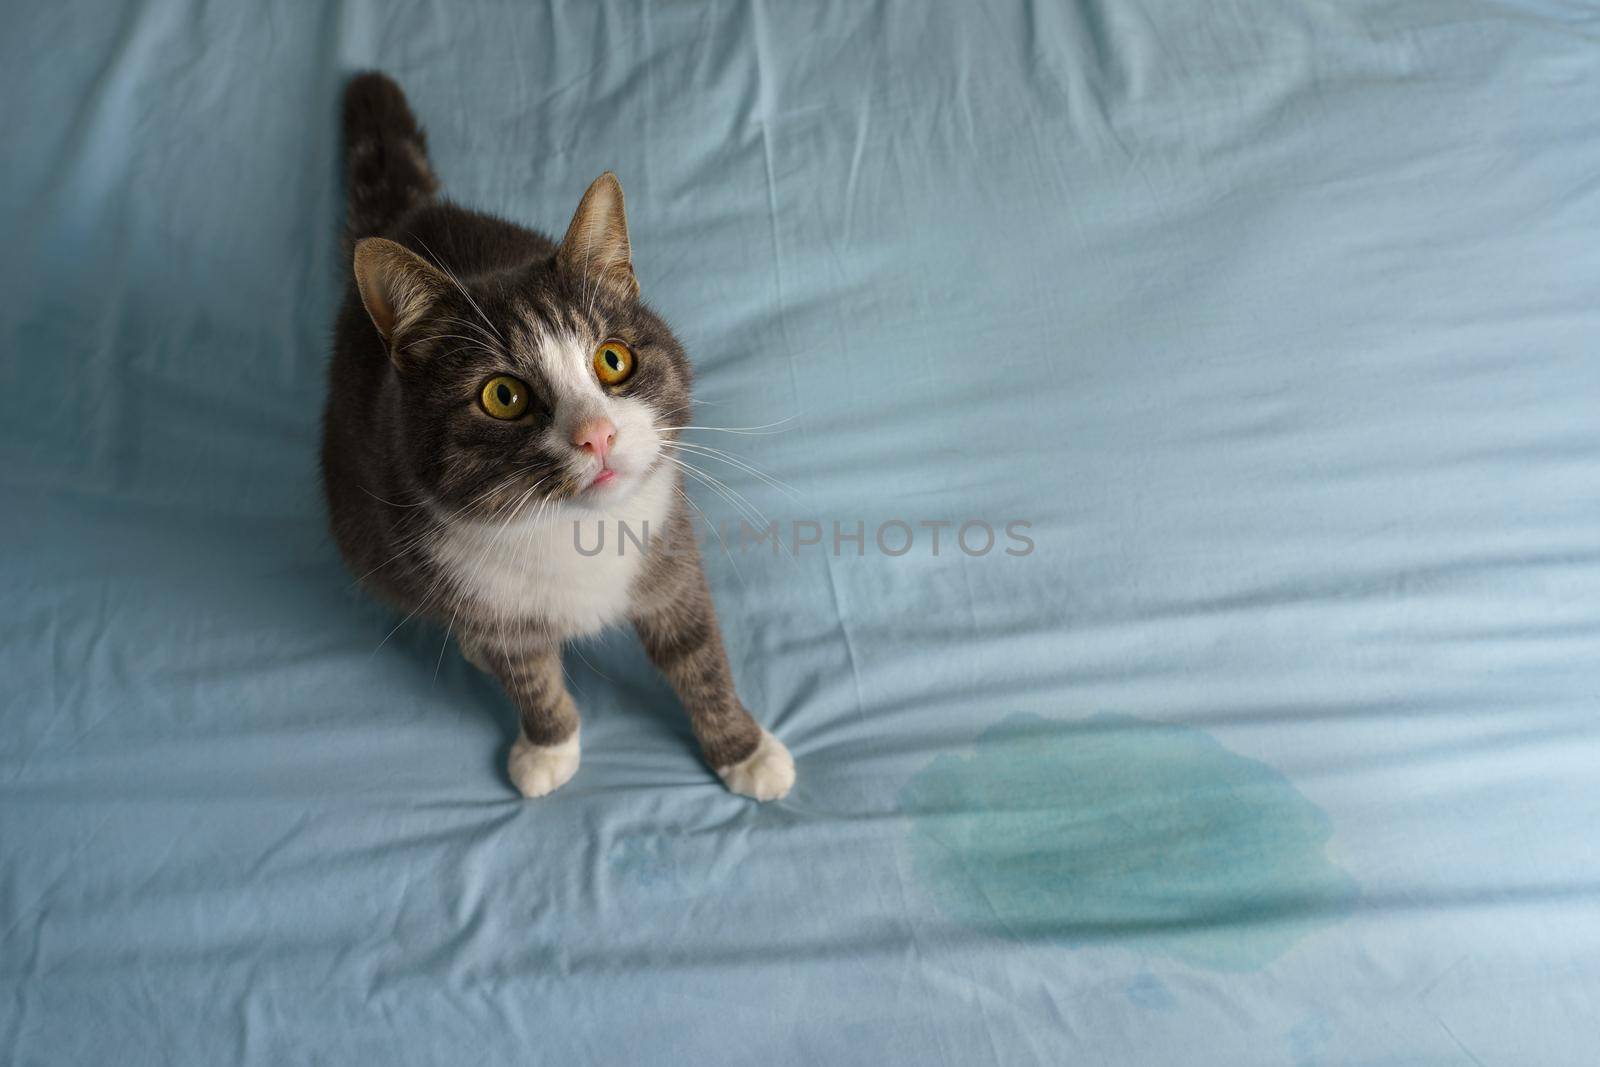 Domestic cat sitting near wet or piss spot on the bed. Cat peeing or urinating on bed. High quality photo